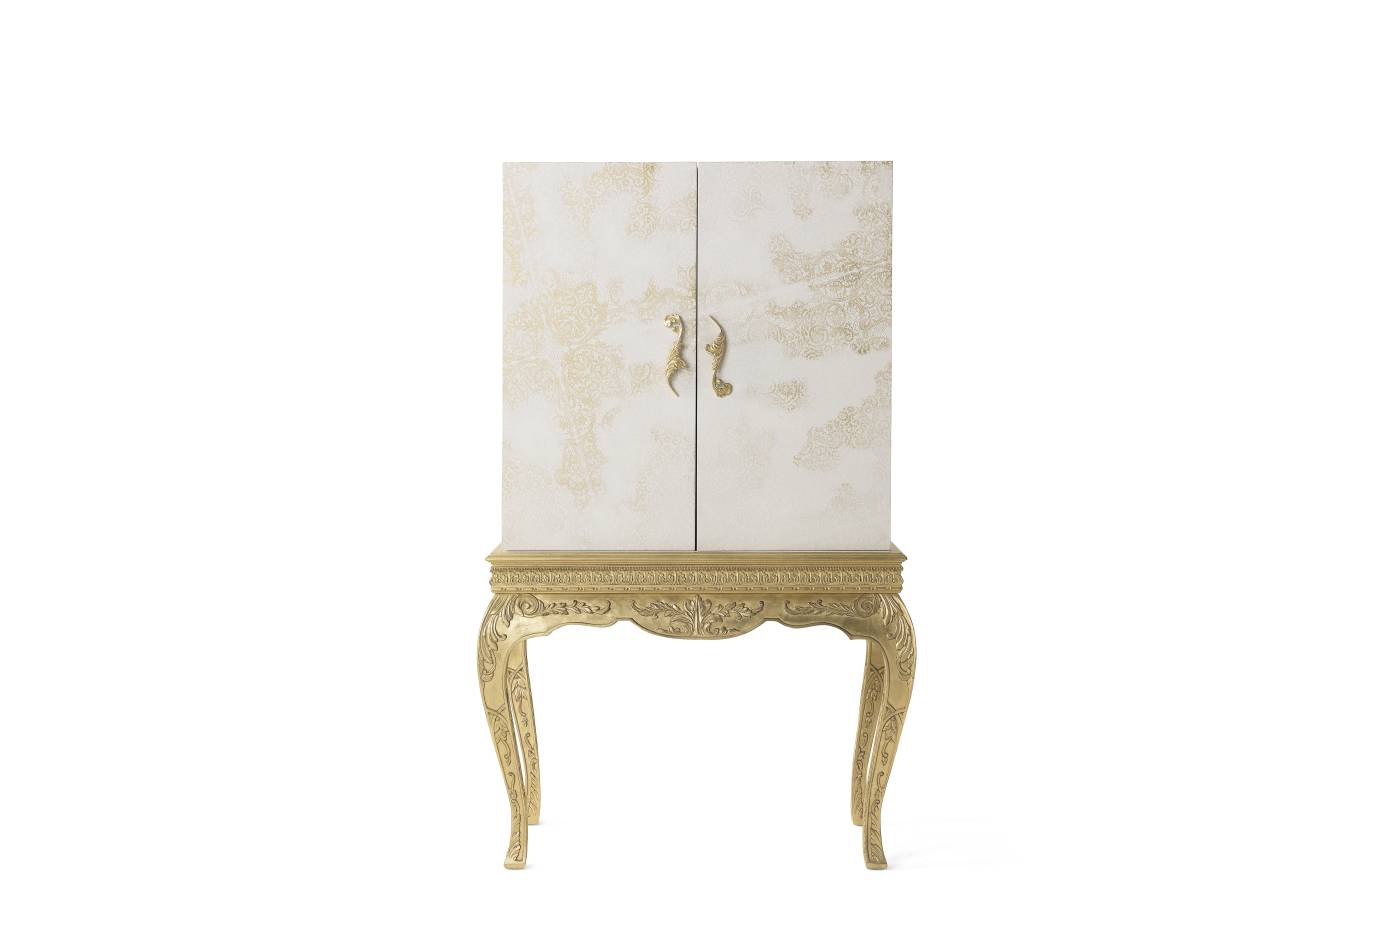 BROCART cabinet – Jumbo Collection Italian luxury classic beauty. tailor-made interior design projects to meet all your furnishing needs